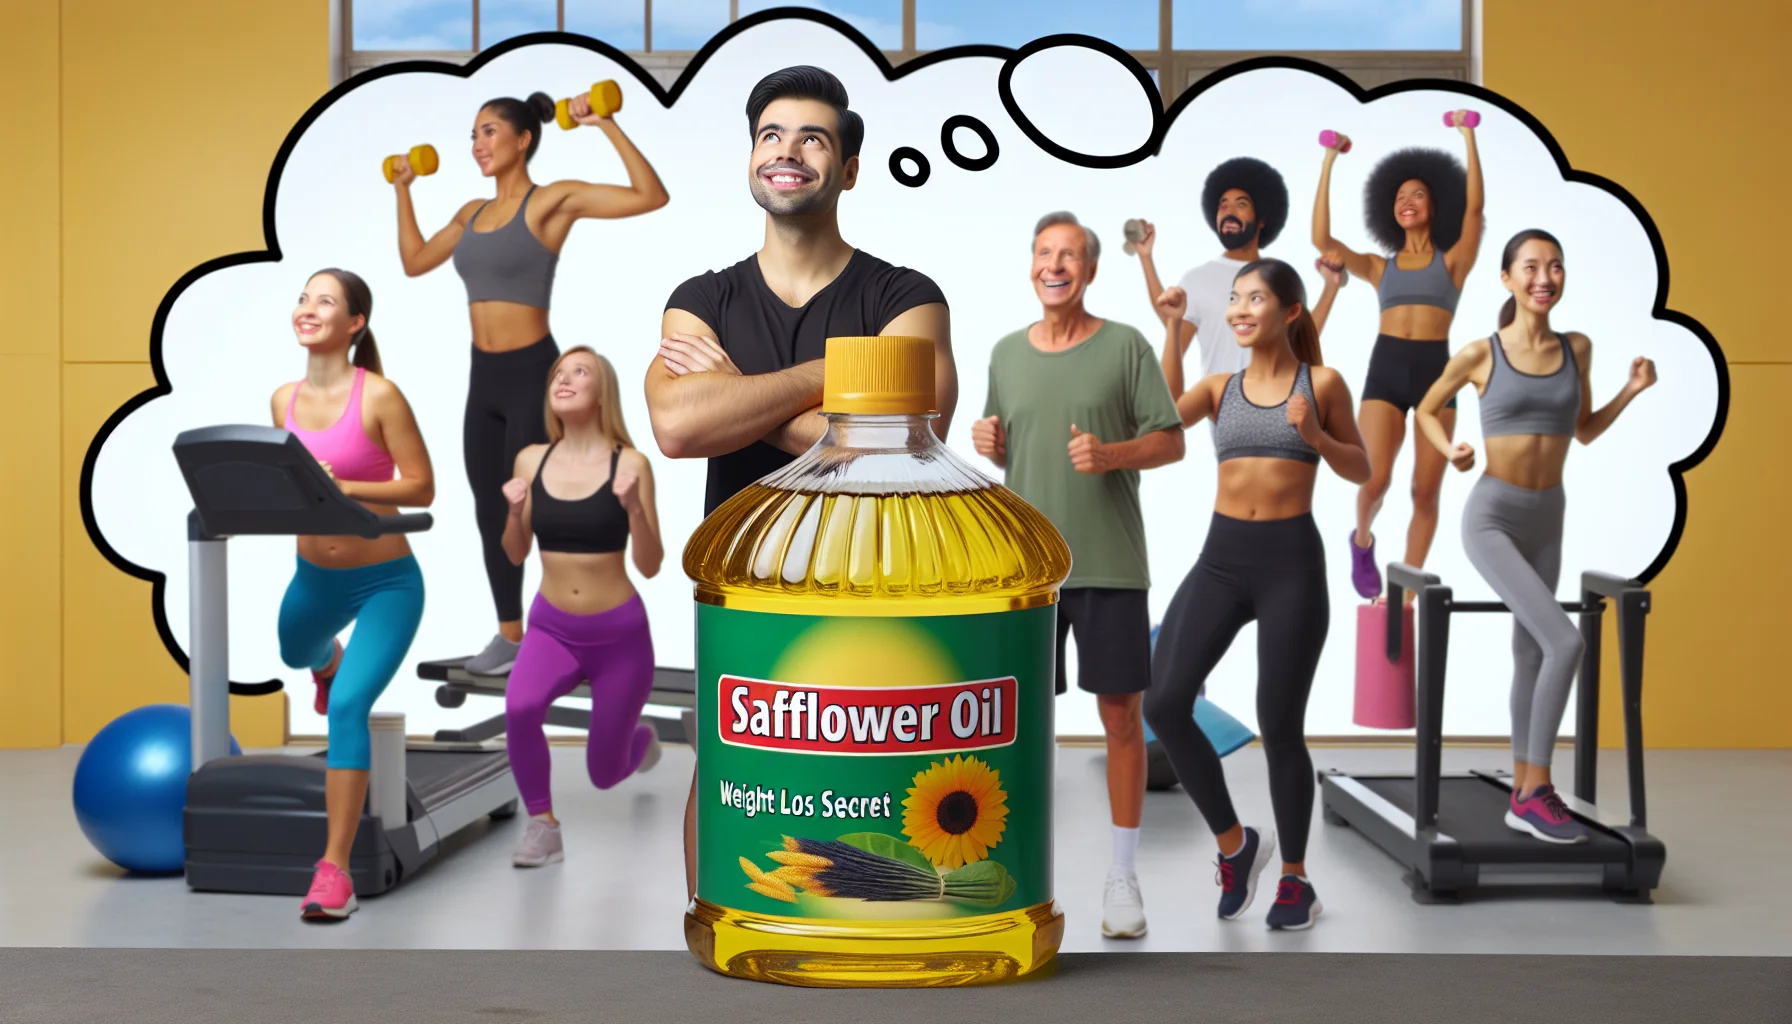 Please generate a humorous image showing a bottle labeled 'Safflower Oil: A Weight Loss Secret' in the foreground. In the background, a variety of people exercising in a gym environment with considered smiles on their faces and thought bubbles depicting that they are dreaming of the Safflower Oil. The people should be diverse in gender and ethnicity representing a wide spectrum of athletic individuals such as a South Asian male lifting weights, a Hispanic female running on a treadmill, a Black male doing yoga and a Caucasian female doing aerobics. Their workout attire should be vibrant and filled with fun patterns to bring out the light-hearted atmosphere.